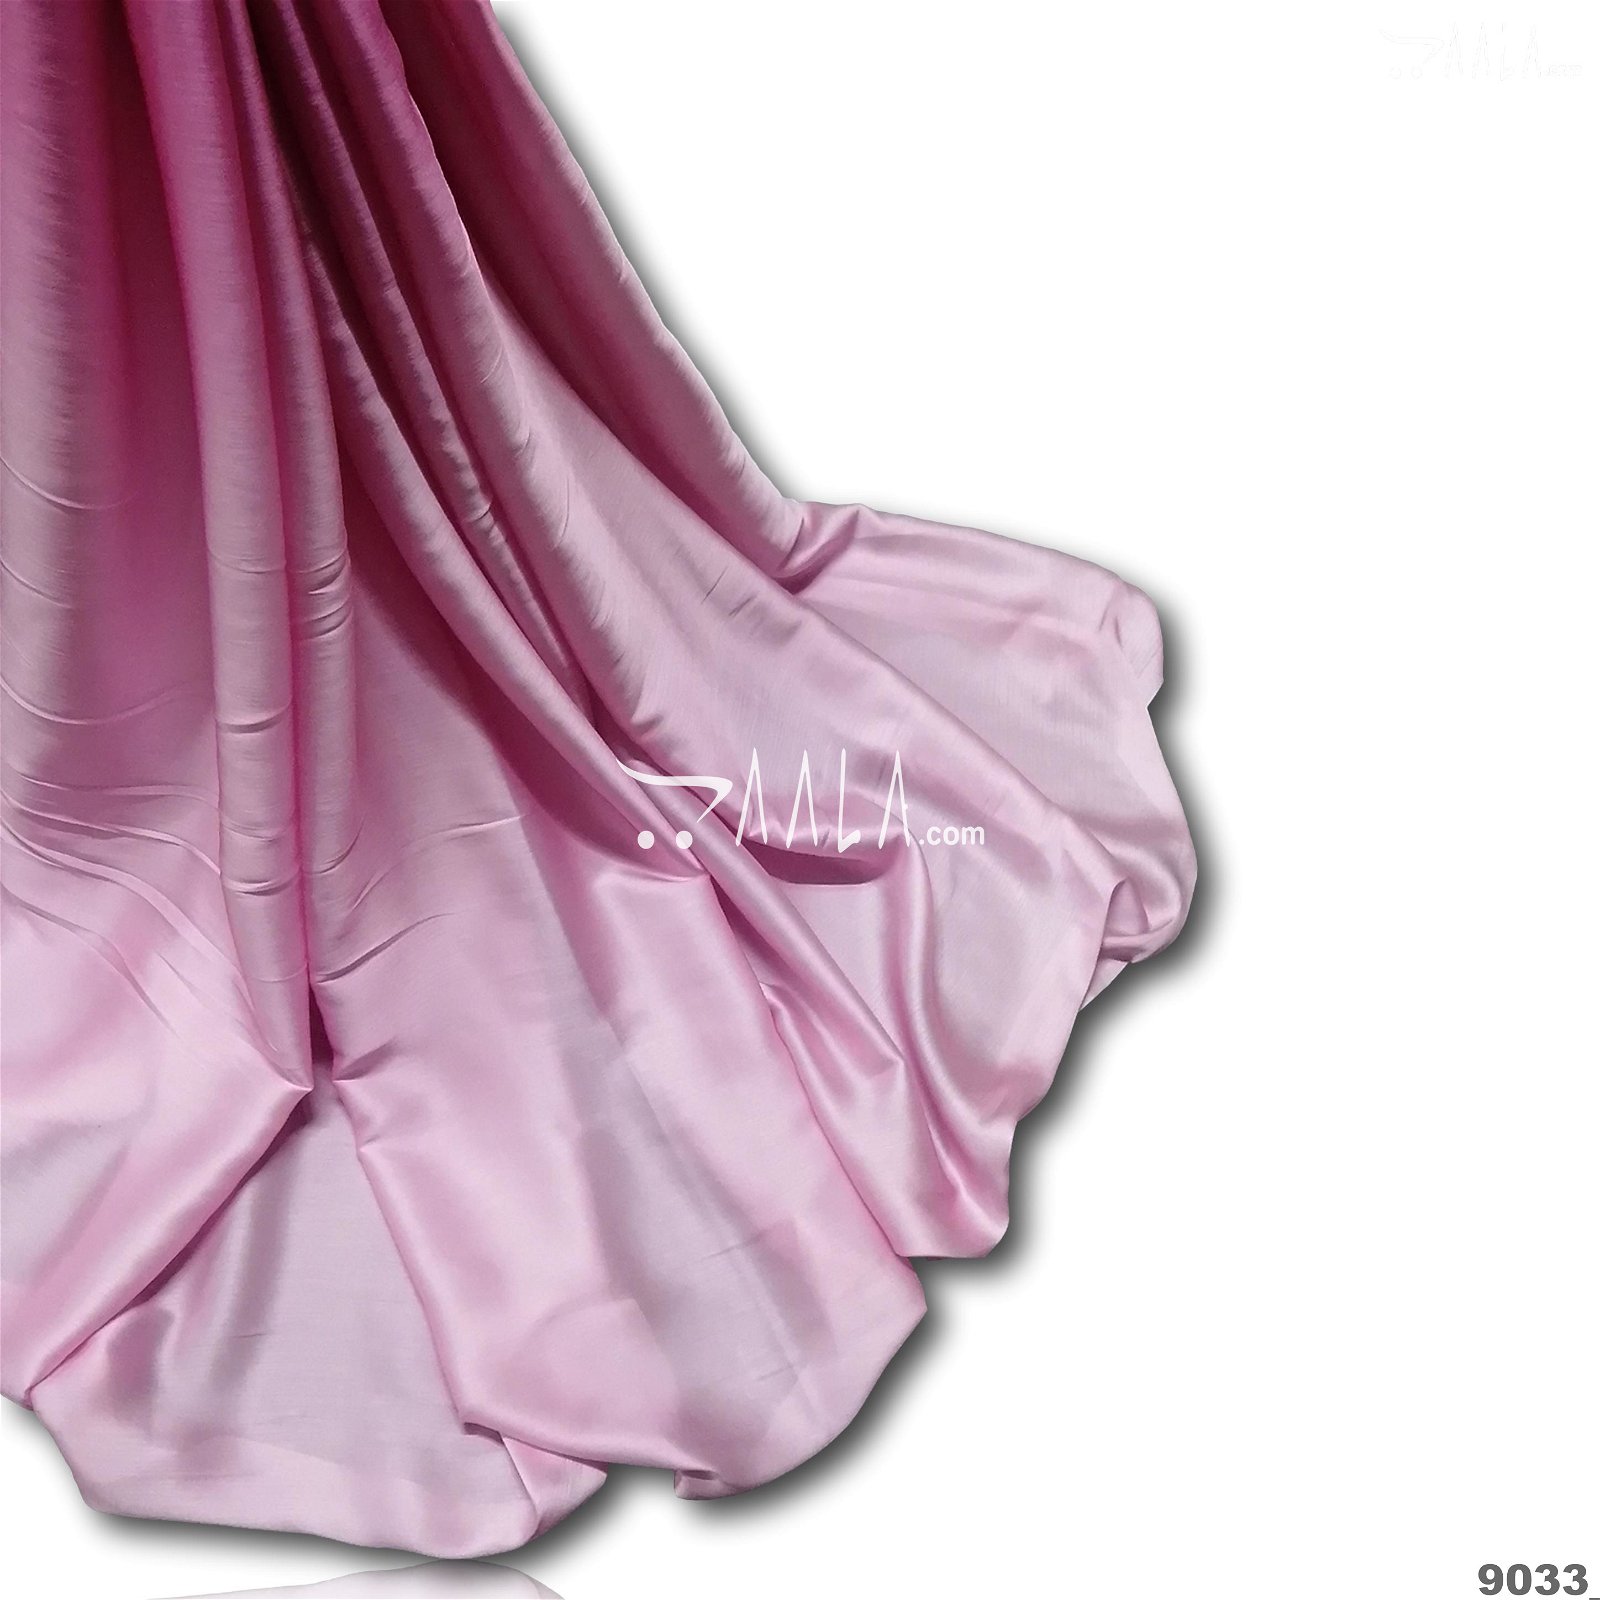 Shaded Satin-Chiffon Poly-ester 44-Inches ASSORTED Per-Metre #9033